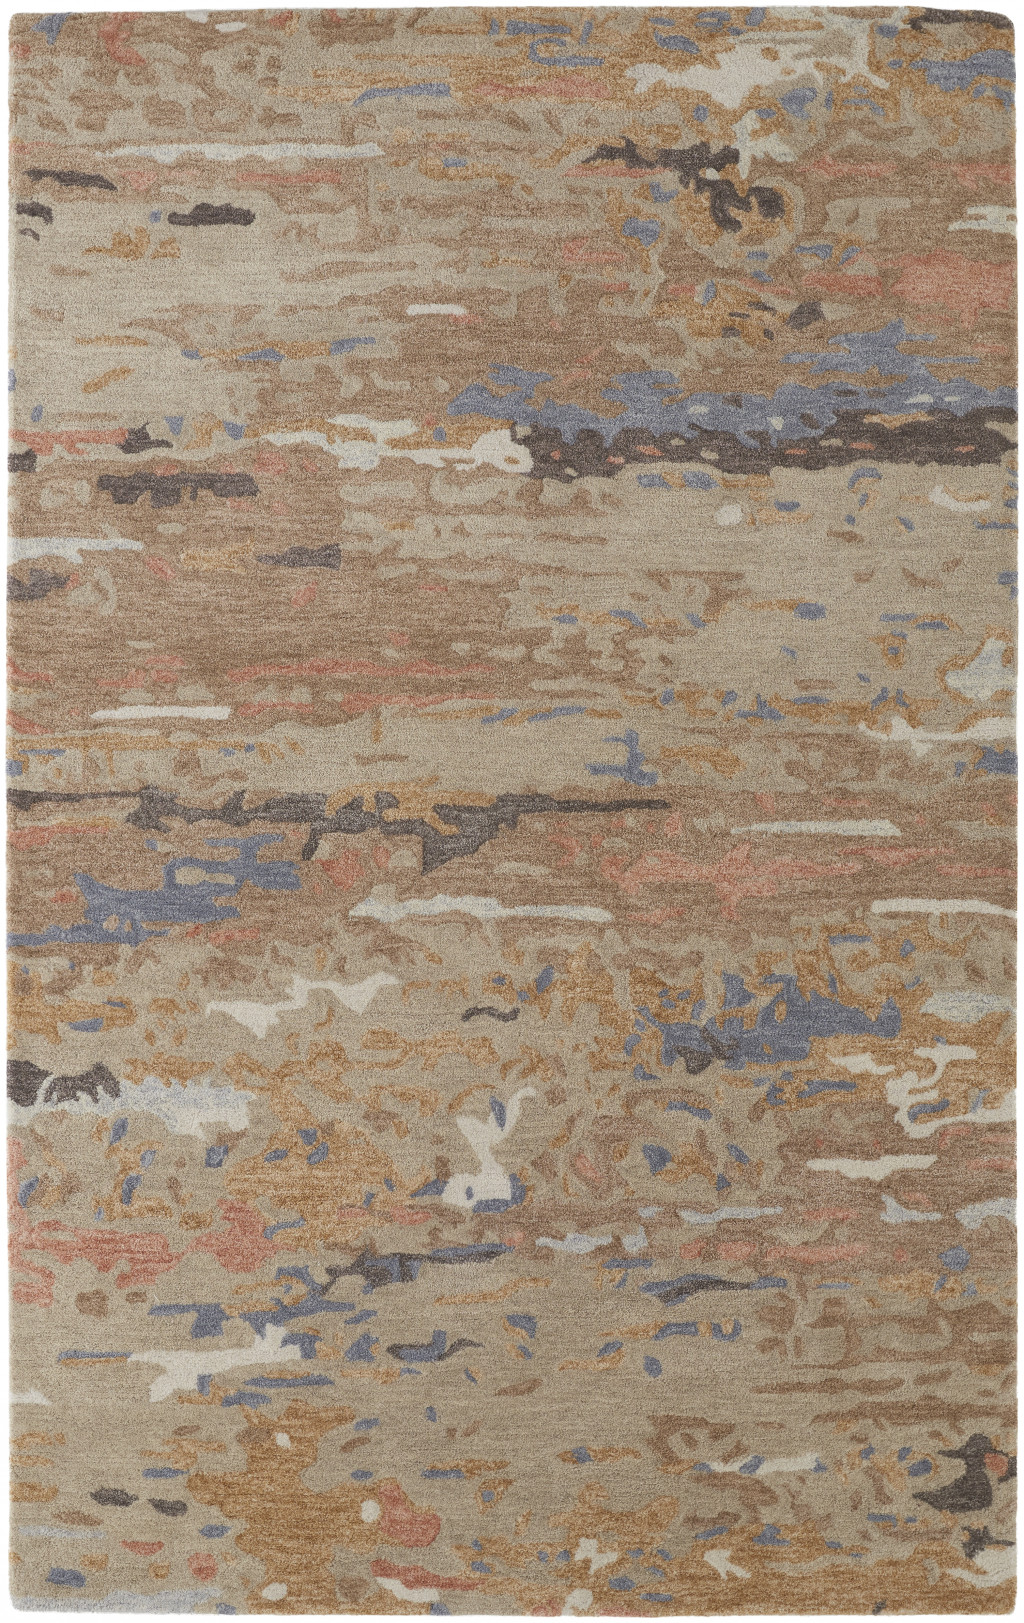 9' X 12' Tan And Blue Wool Abstract Tufted Handmade Stain Resistant Area Rug-513610-1